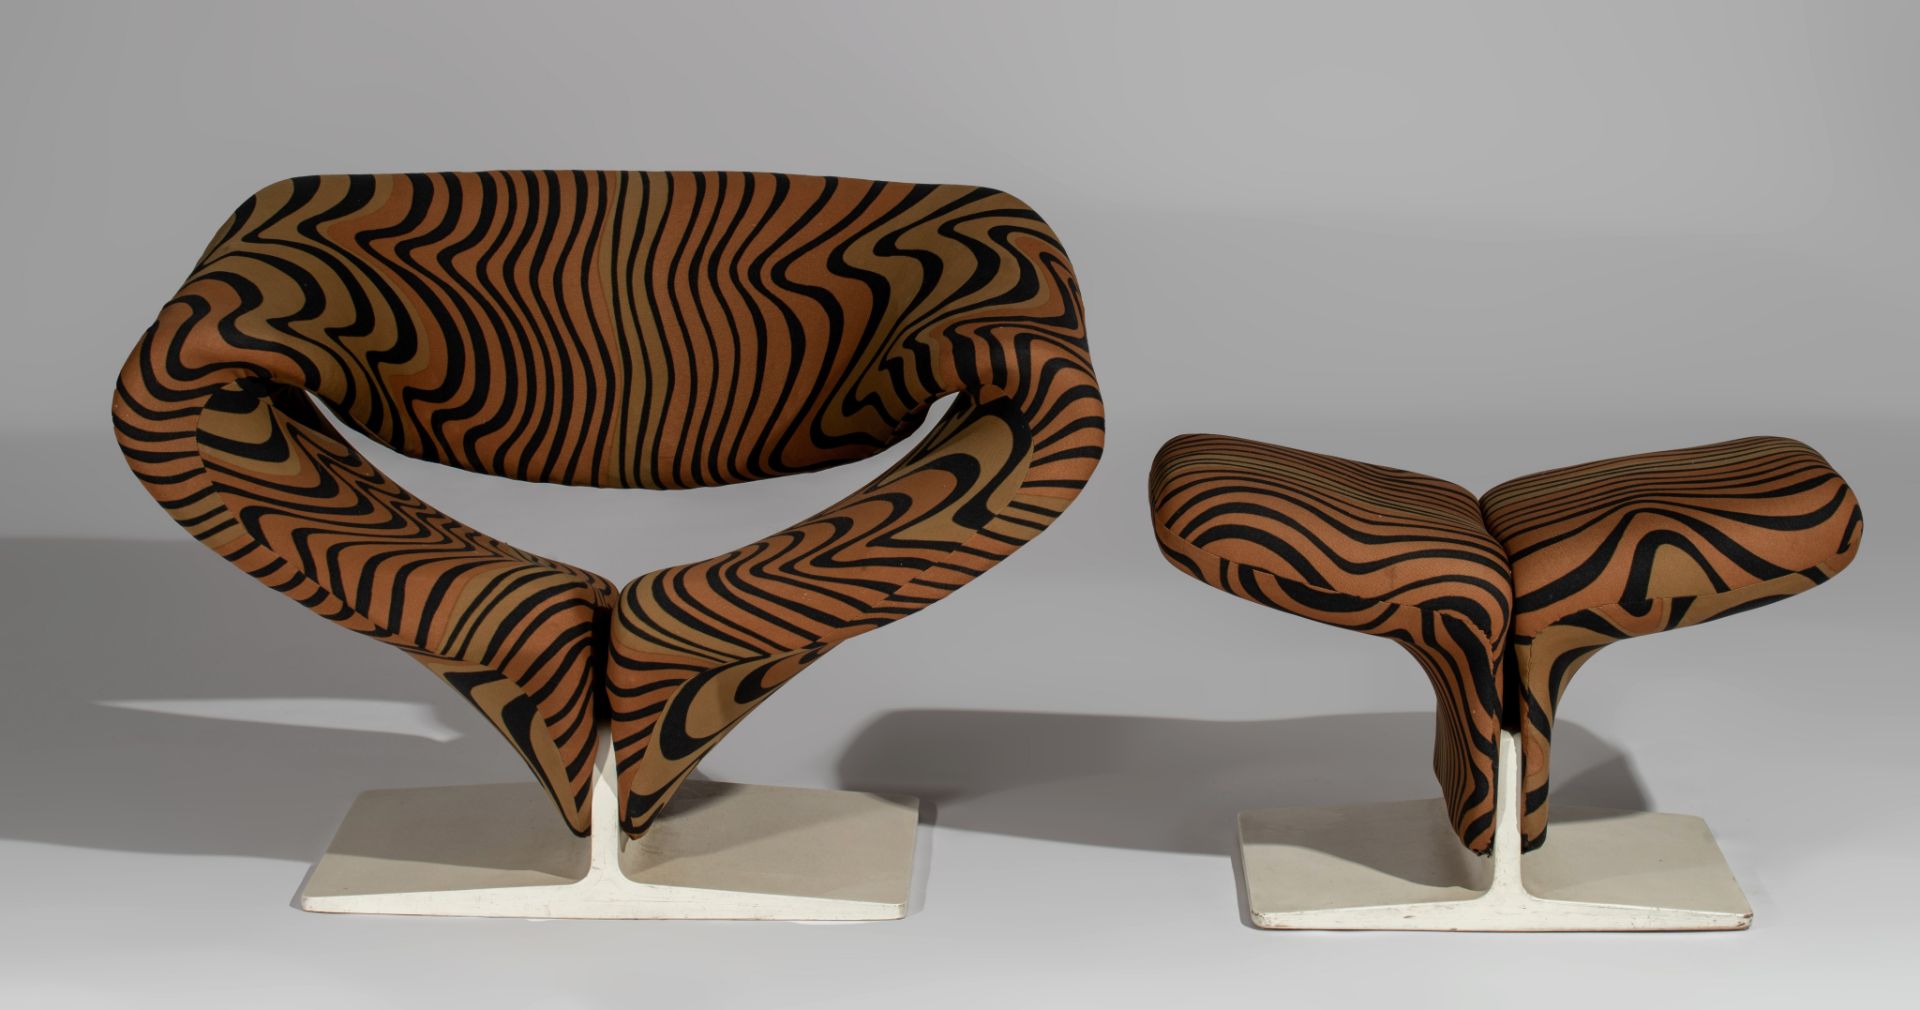 A rare Ribbon chair and ottoman by Pierre Paulin for Artifort, upholstered in 'Tiger' fabric by Jack - Image 4 of 20